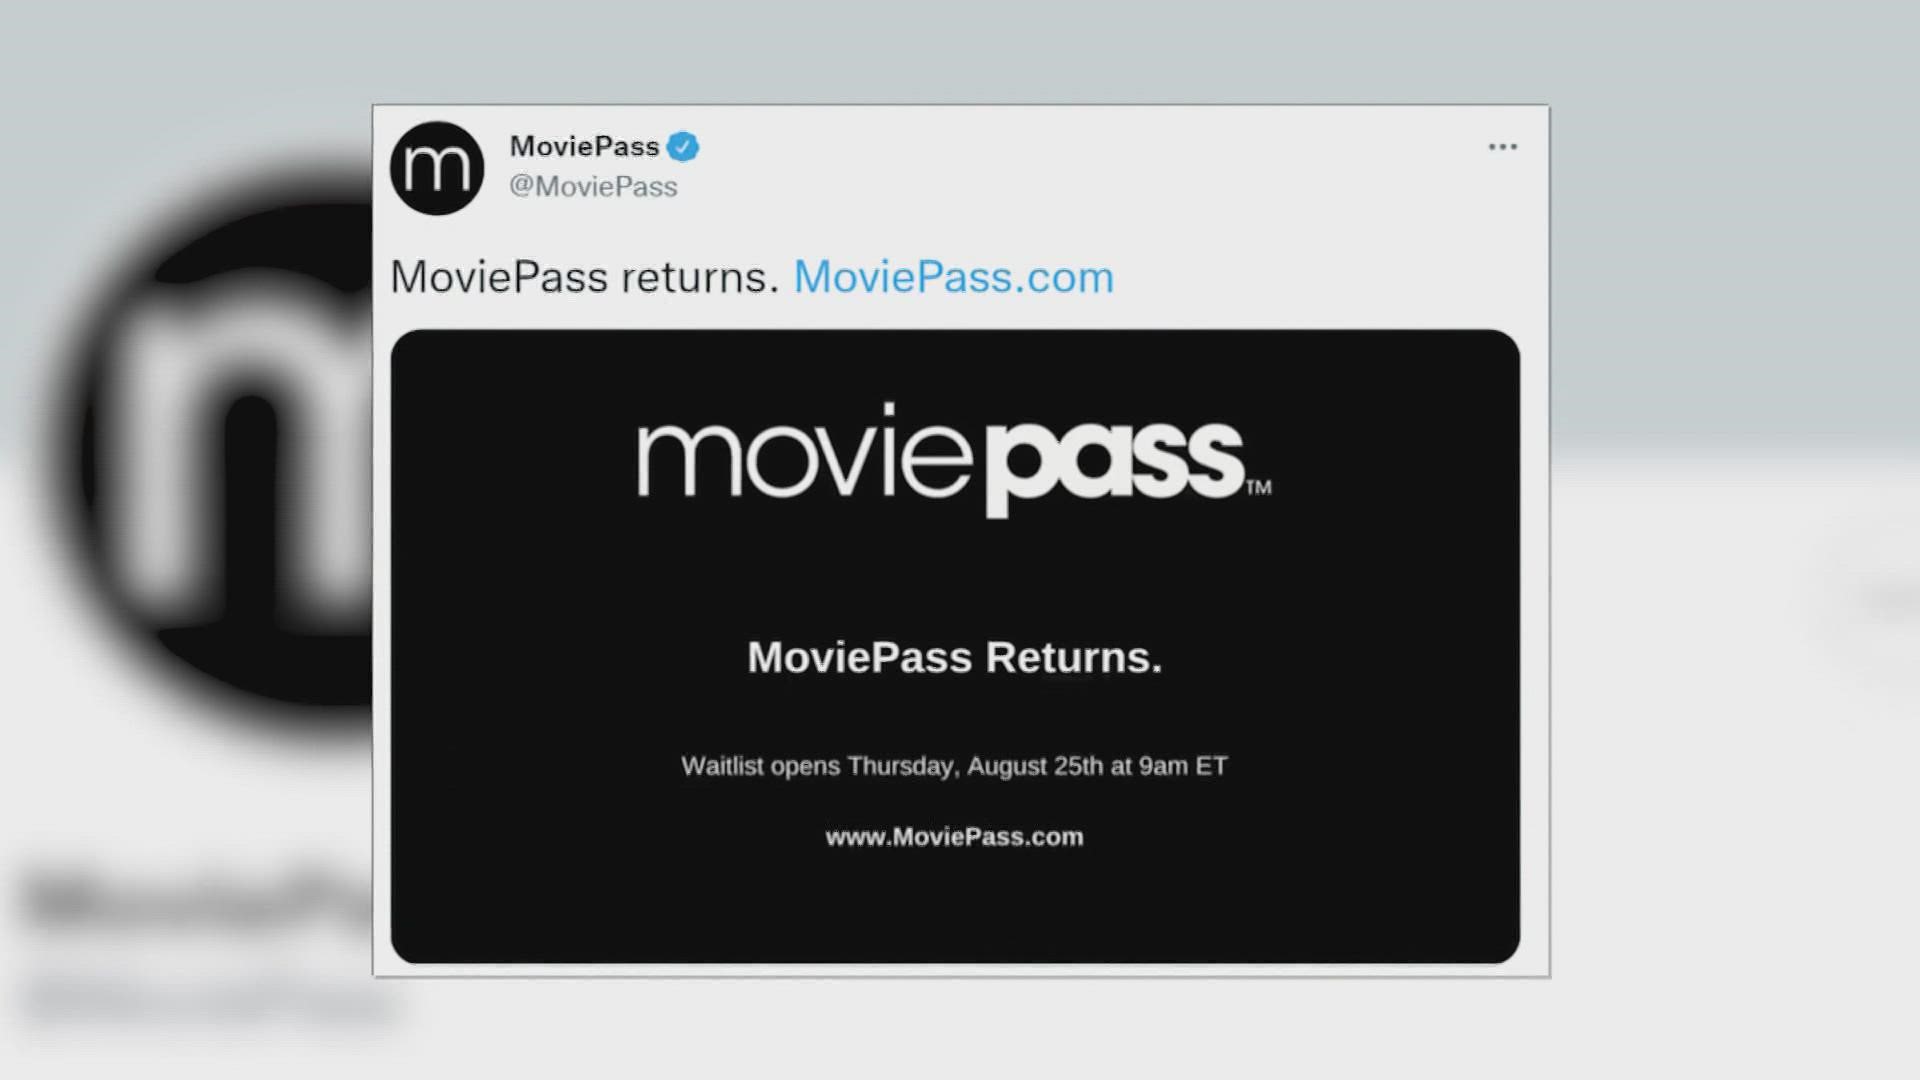 The new beta version of MoviePass will launch this Labor Day with different pricing tiers.